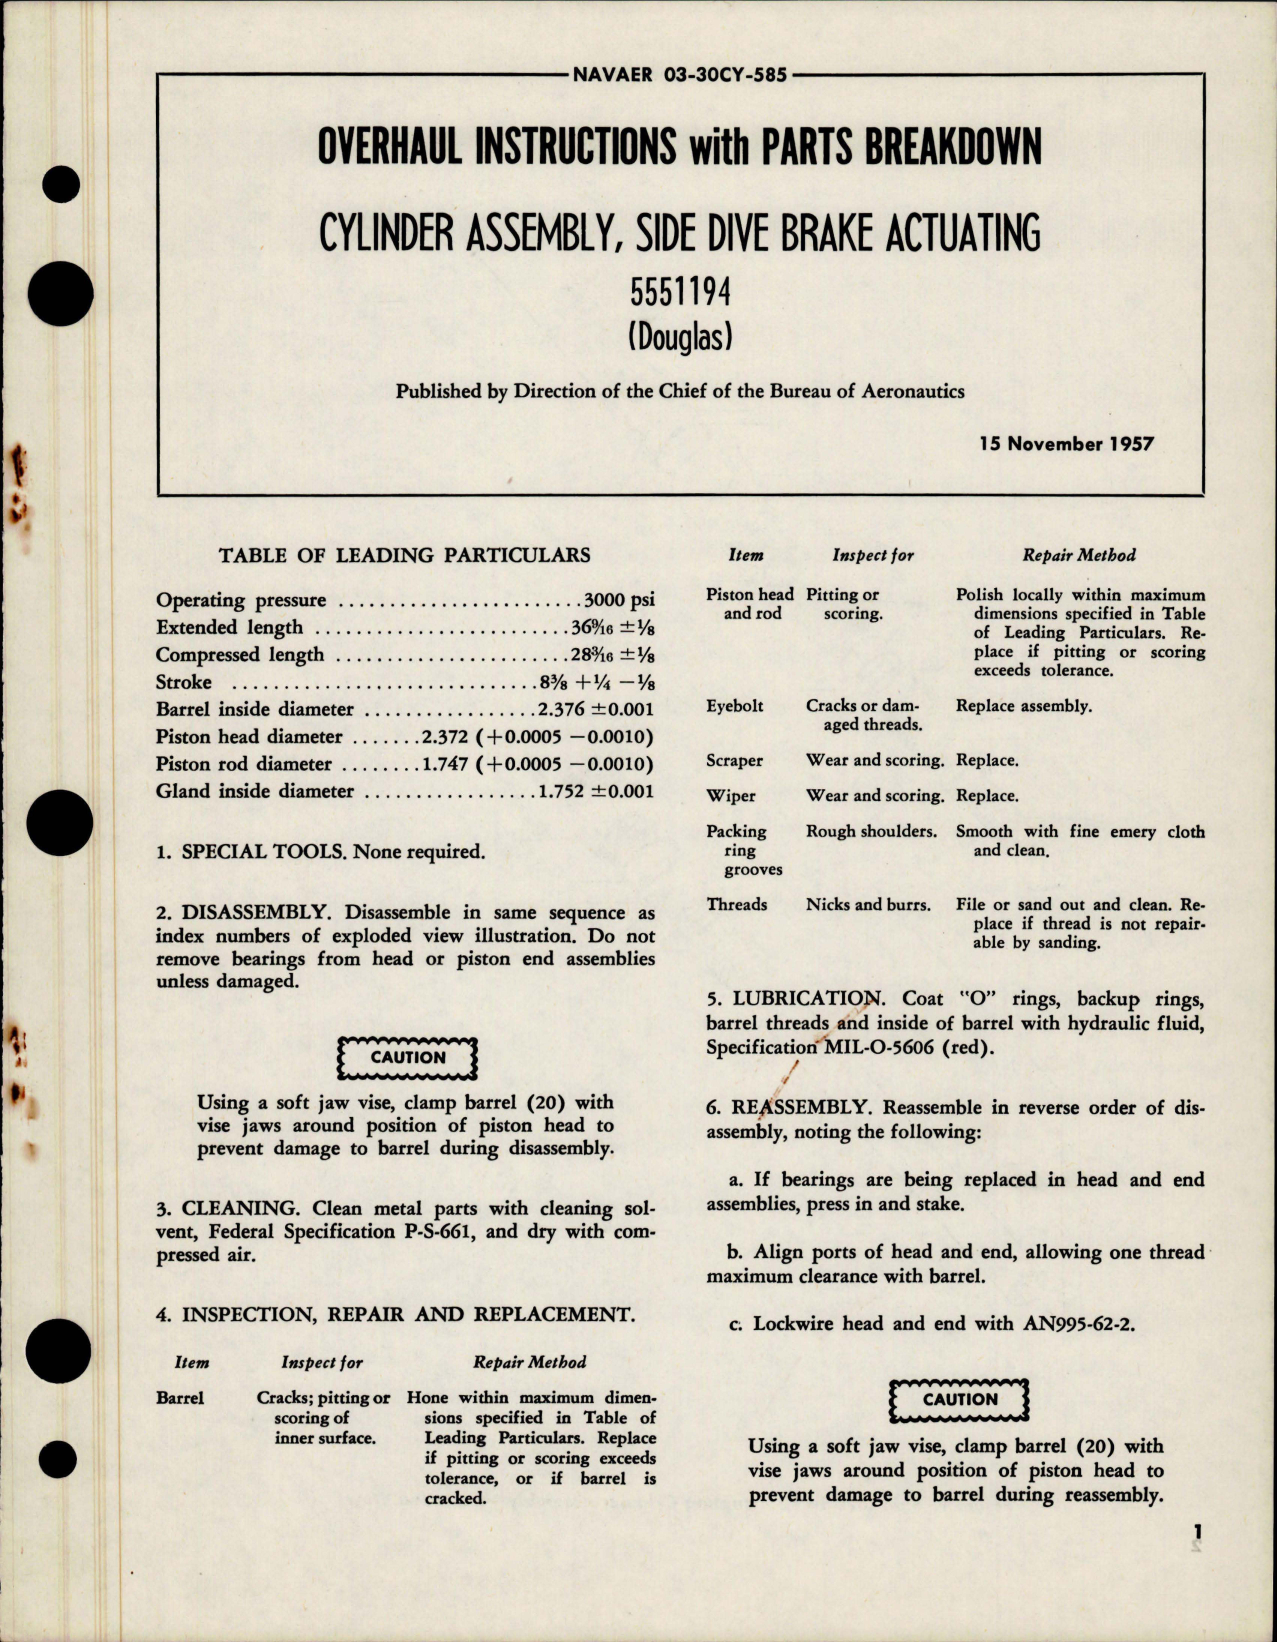 Sample page 1 from AirCorps Library document: Overhaul Instructions with Parts Breakdown for Side Dive Brake Actuating Cylinder Assembly - 5551194 